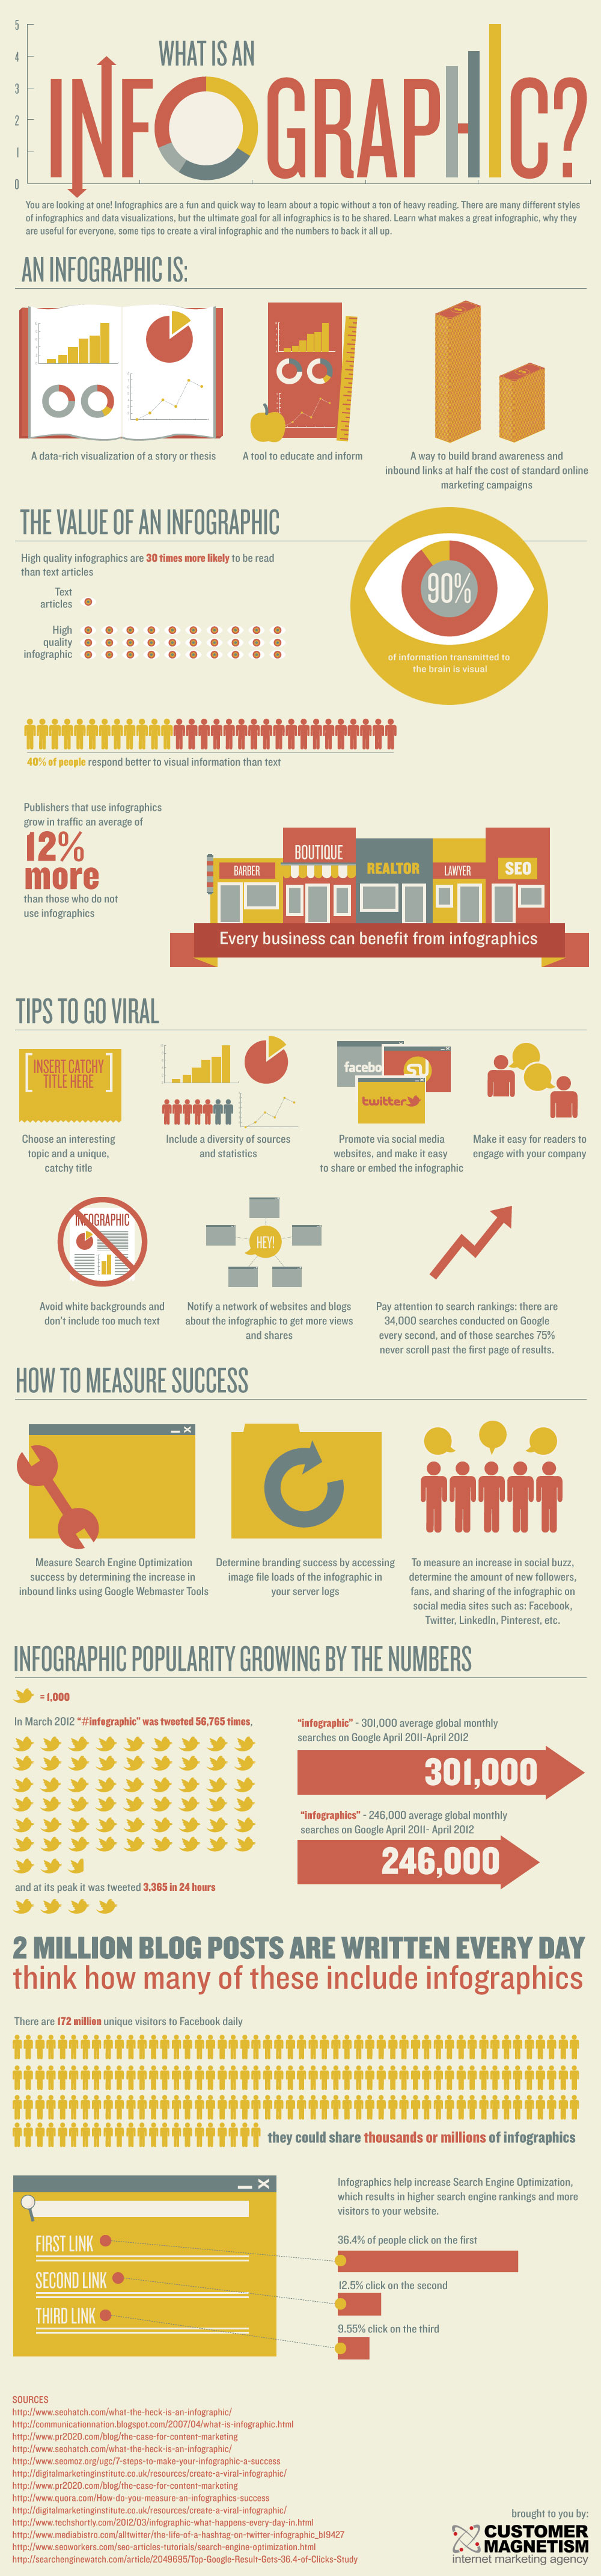 disadvantages of online infographic creator